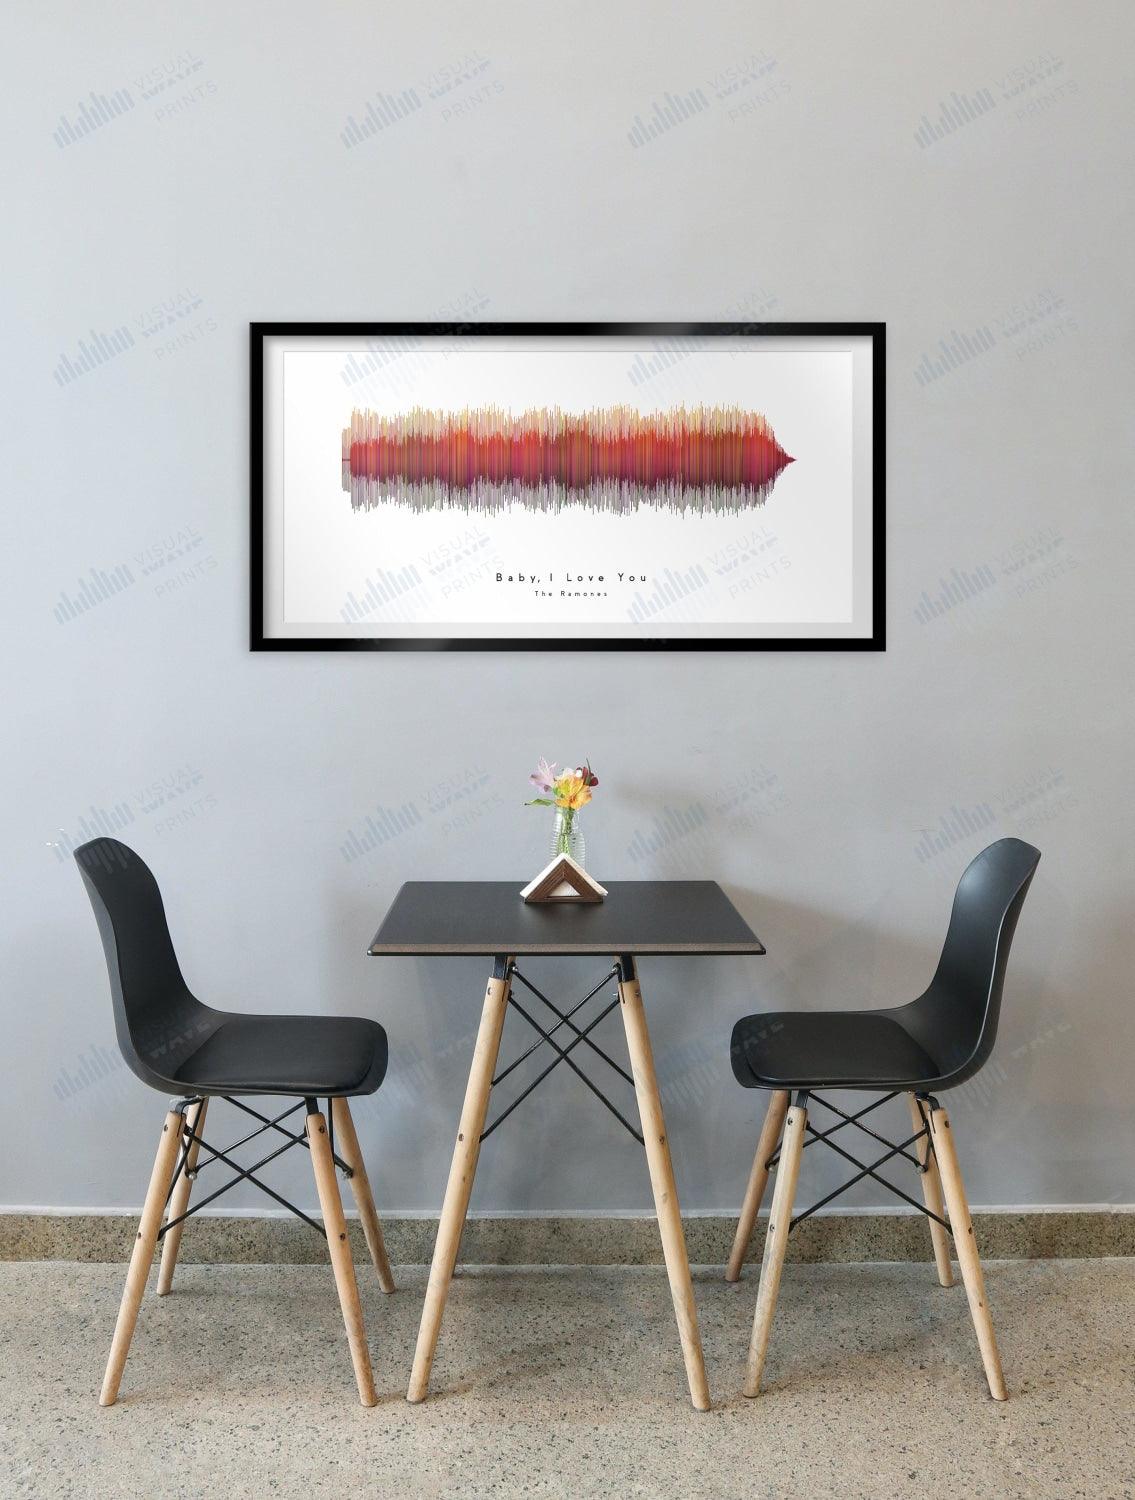 Baby, I Love You by The Ramones - Visual Wave Prints